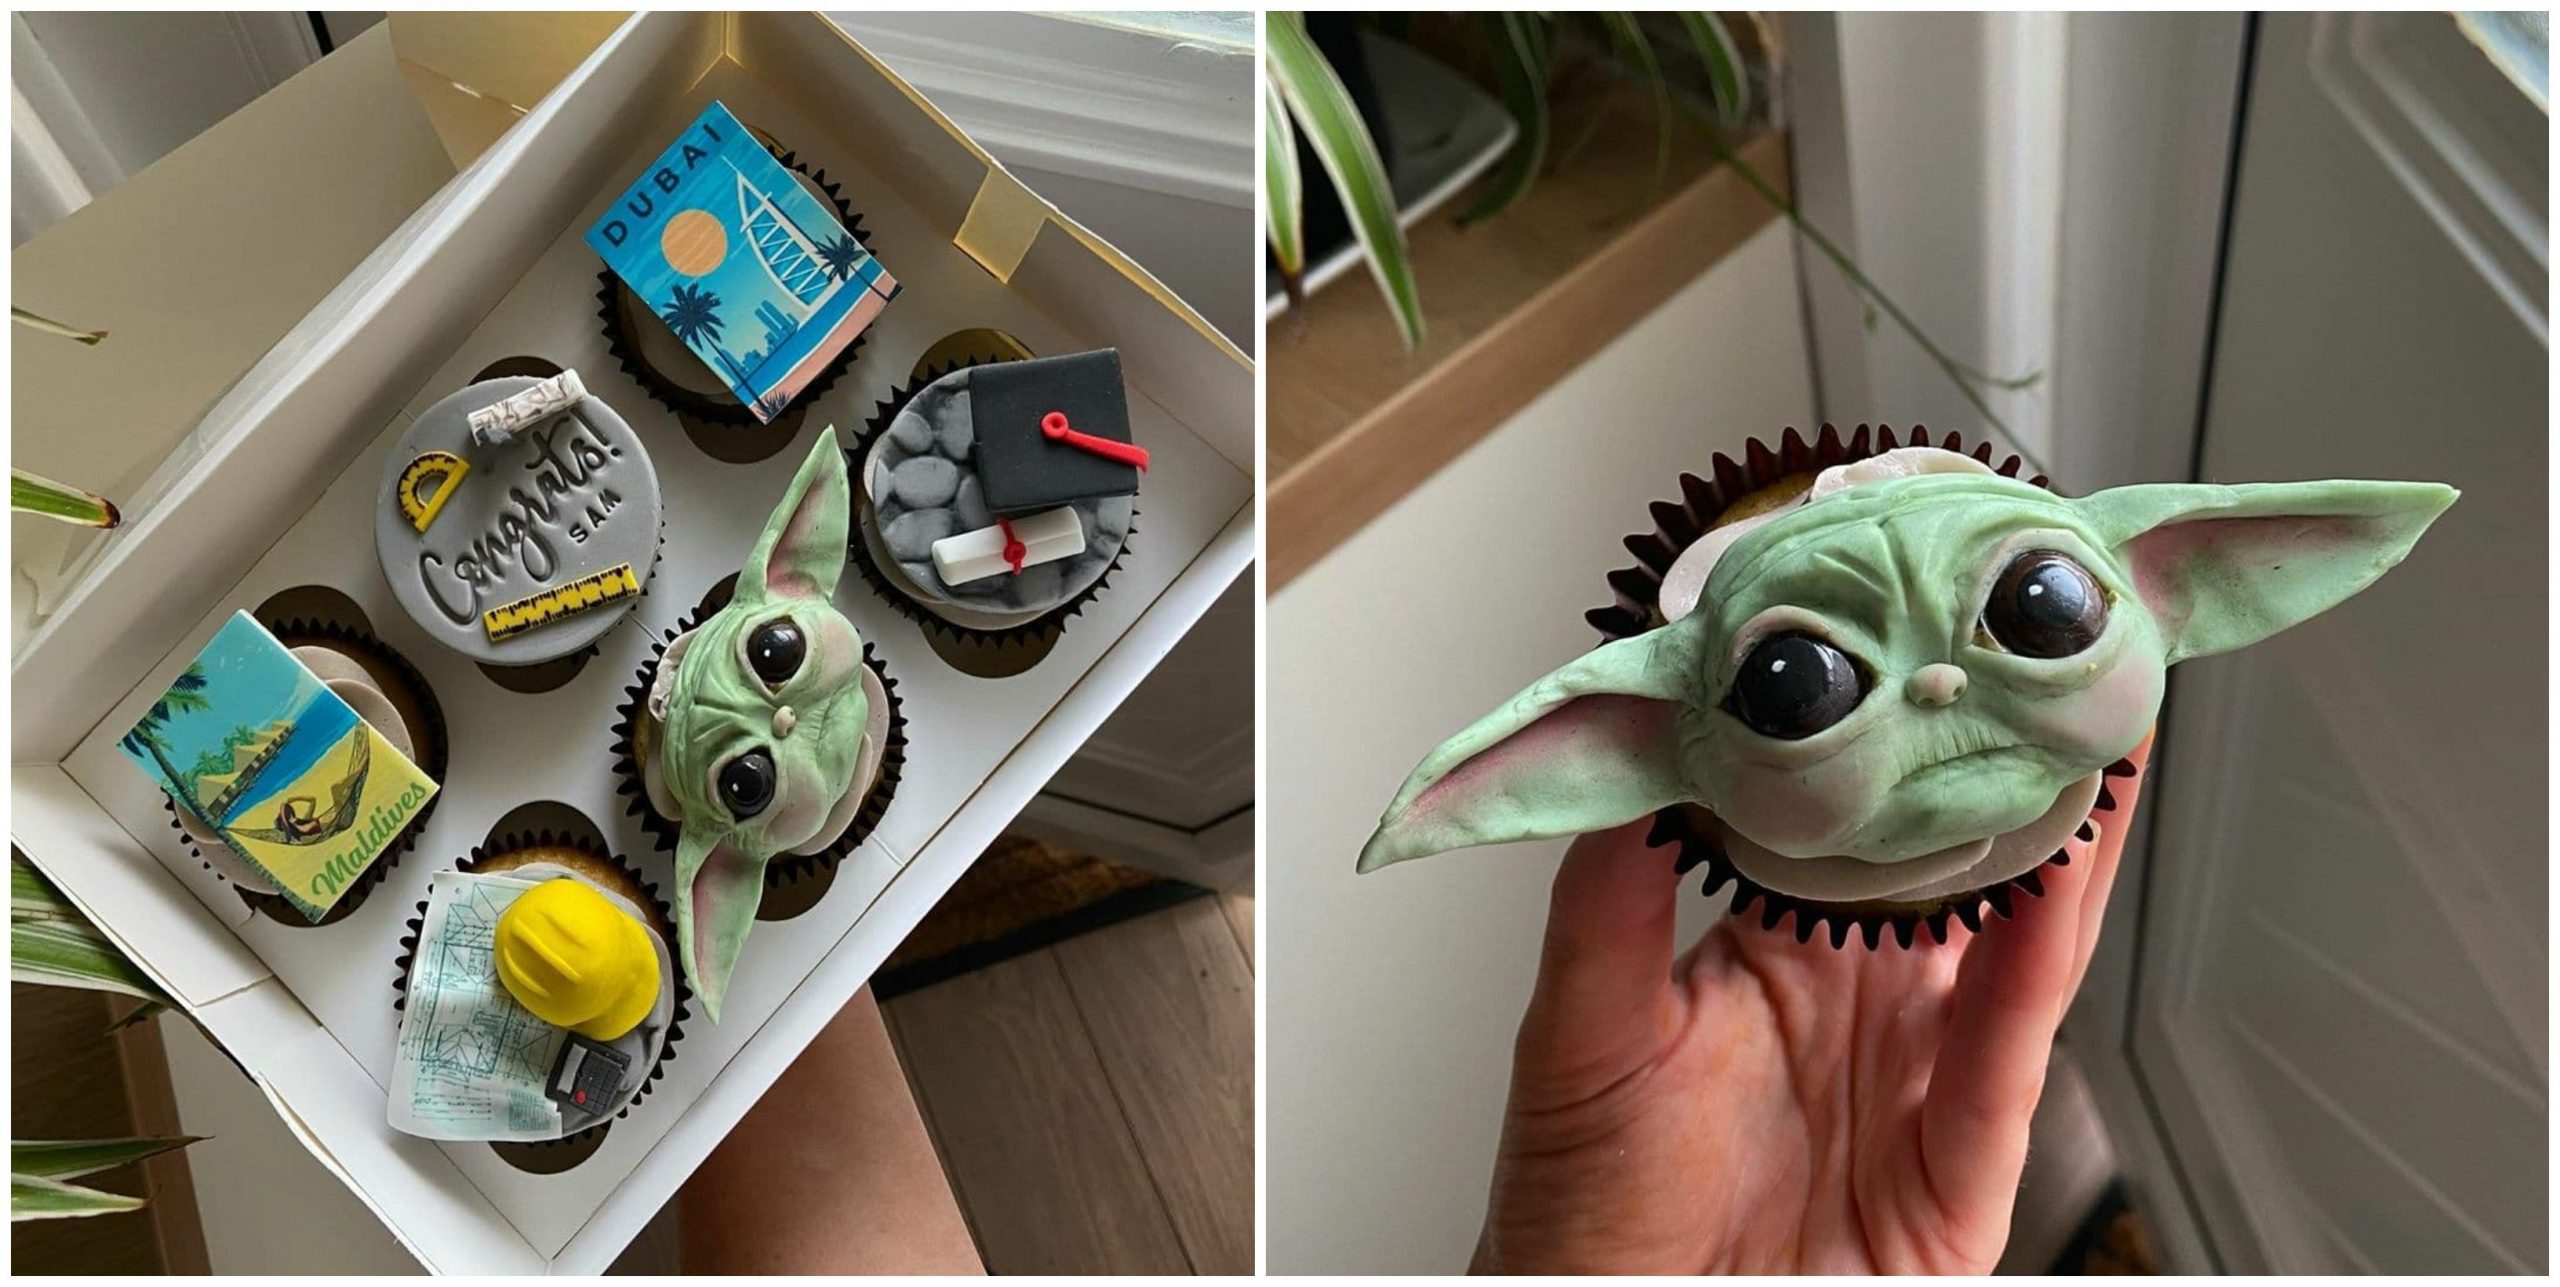 These force stopping Baby Yoda cupcakes are the best snacks ever!